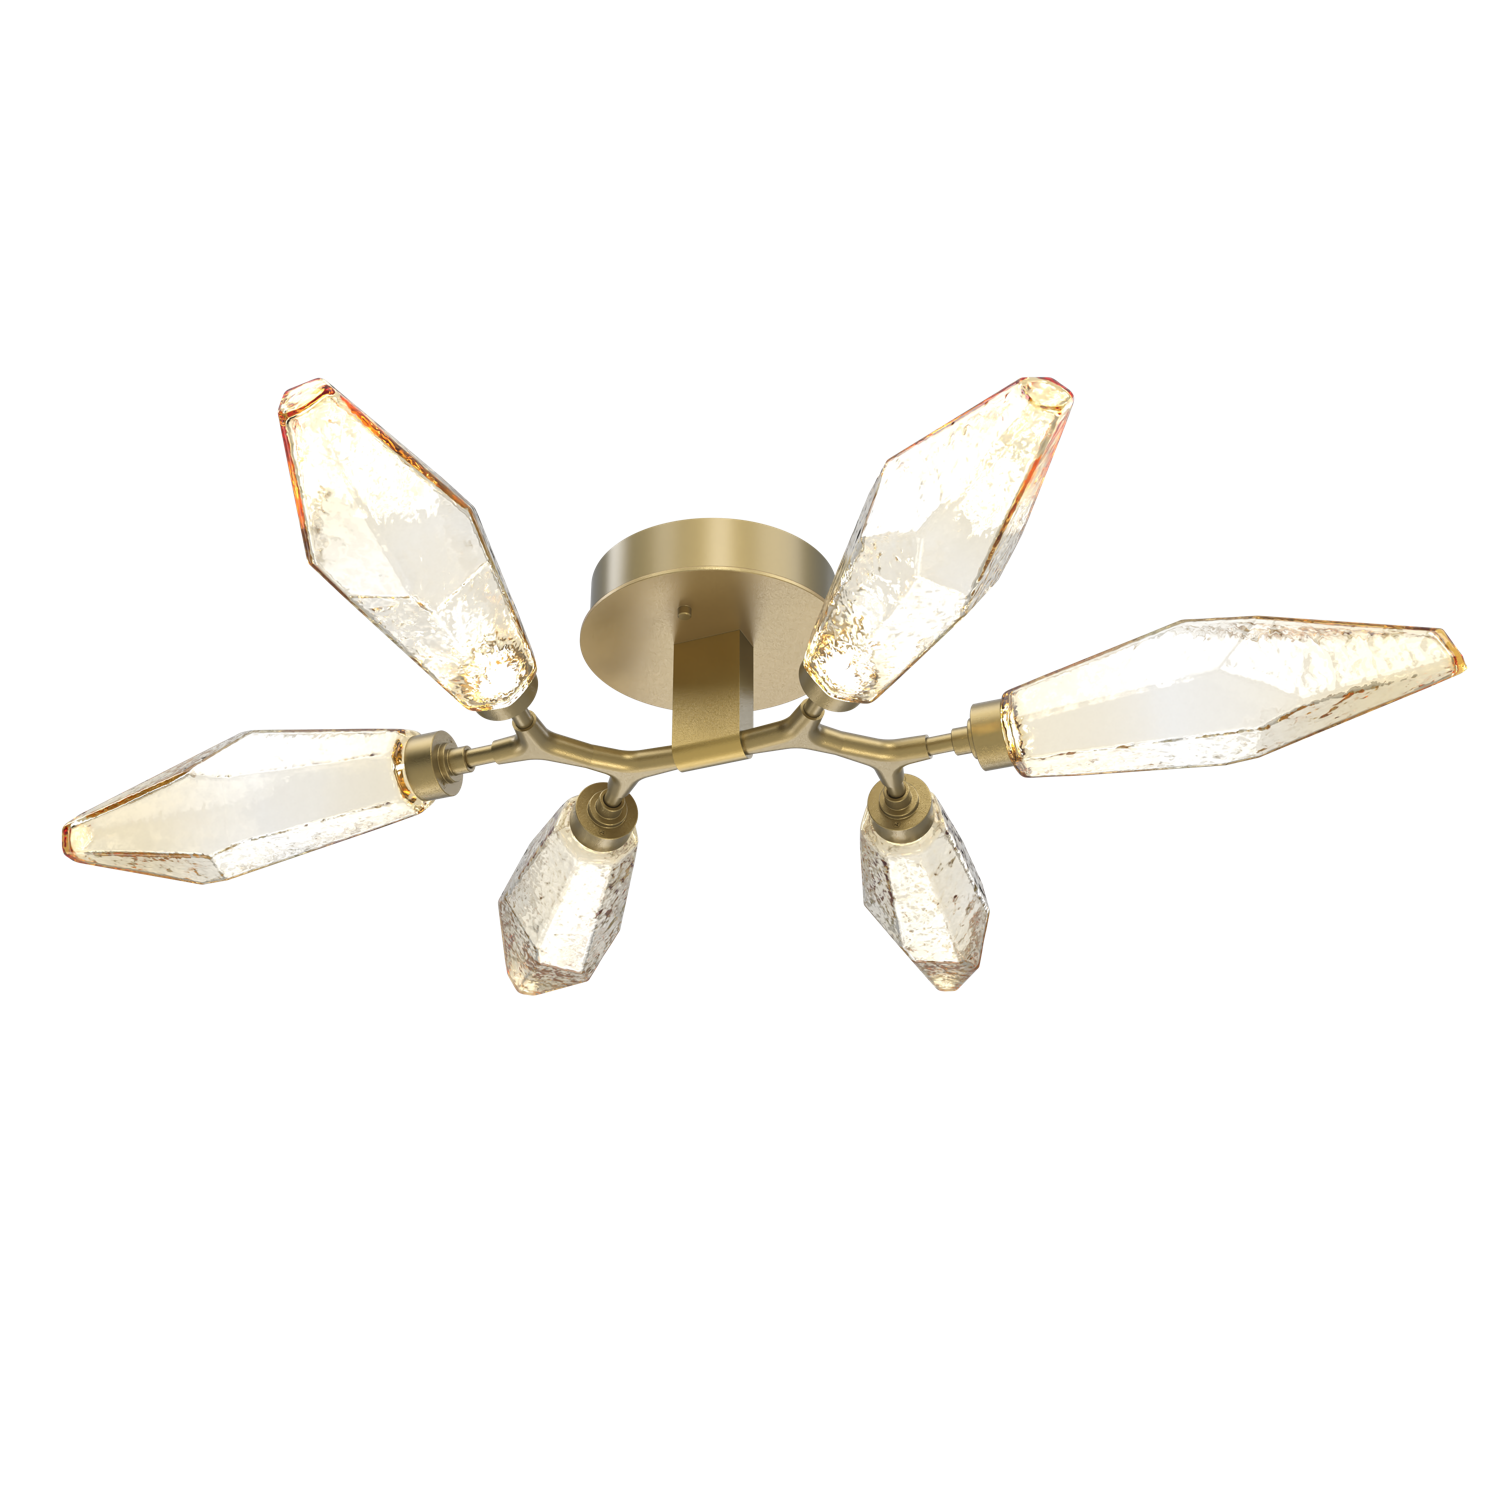 CLB0050-01-GB-CA-Hammerton-Studio-Rock-Crystal-flush-mount-light-with-gilded-brass-finish-and-chilled-amber-blown-glass-shades-and-LED-lamping